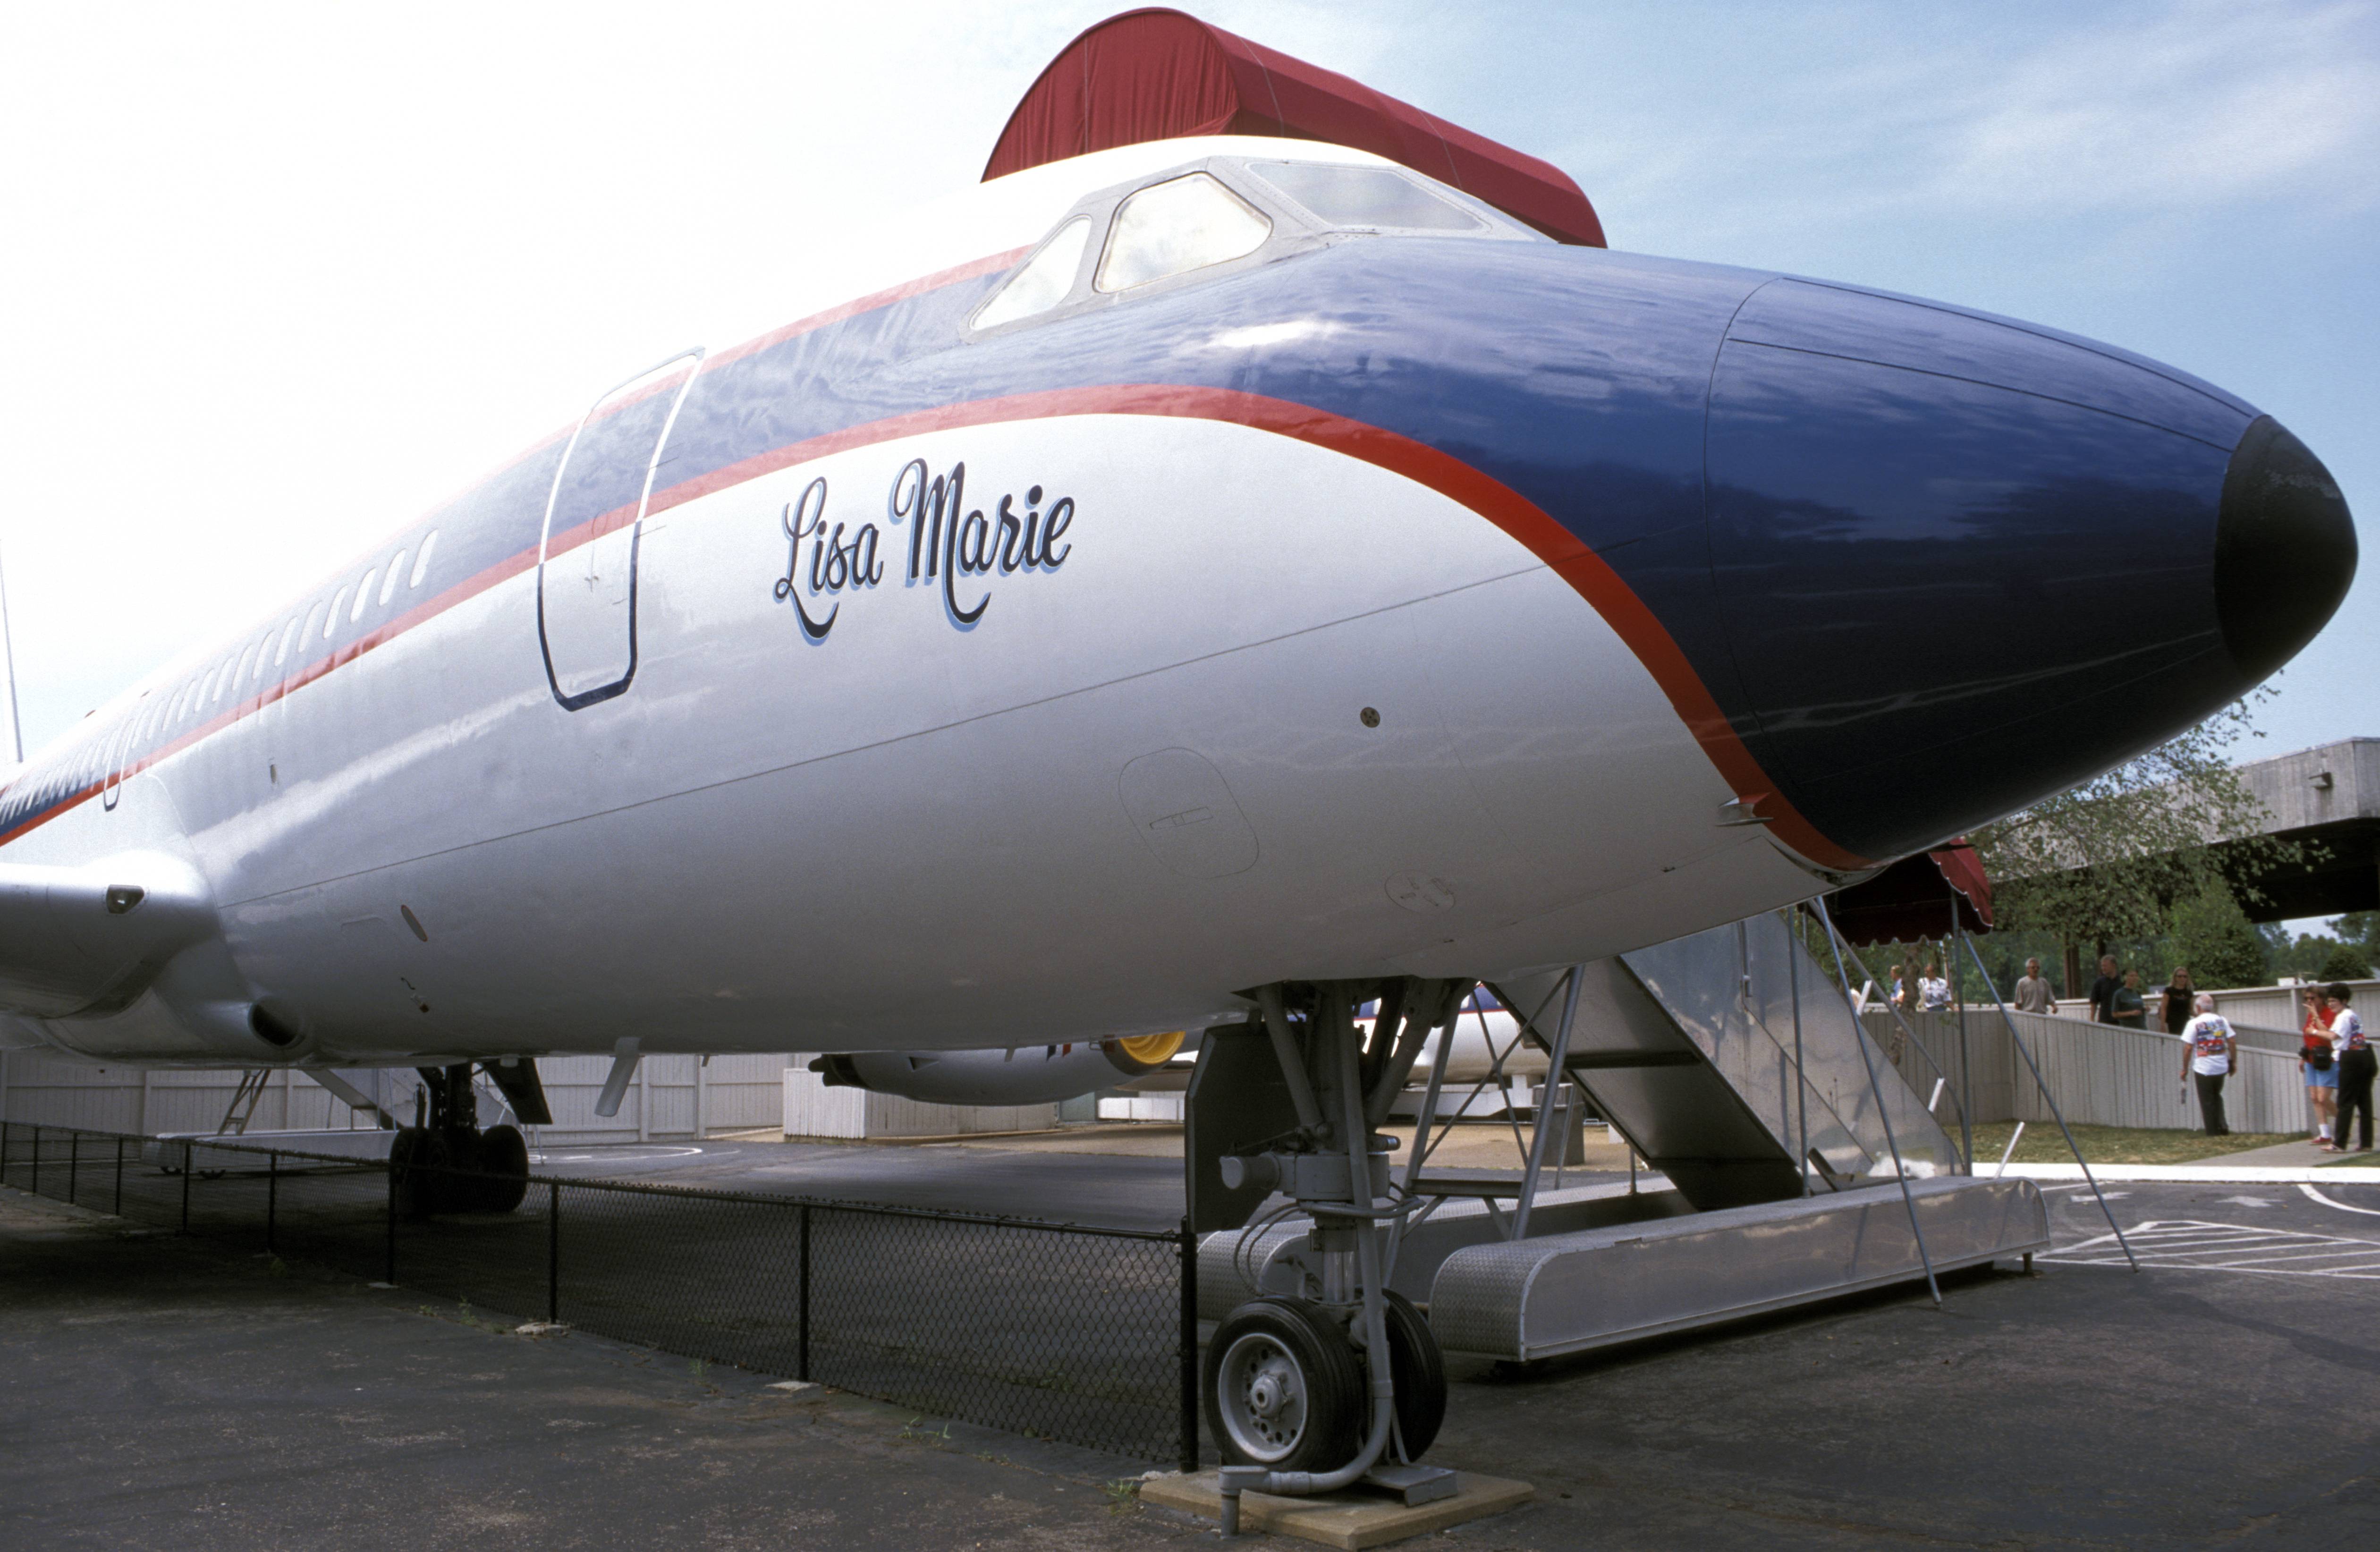 Photo of Elvis Presley's aircraft, the "Lisa Marie" | Source: Getty Images